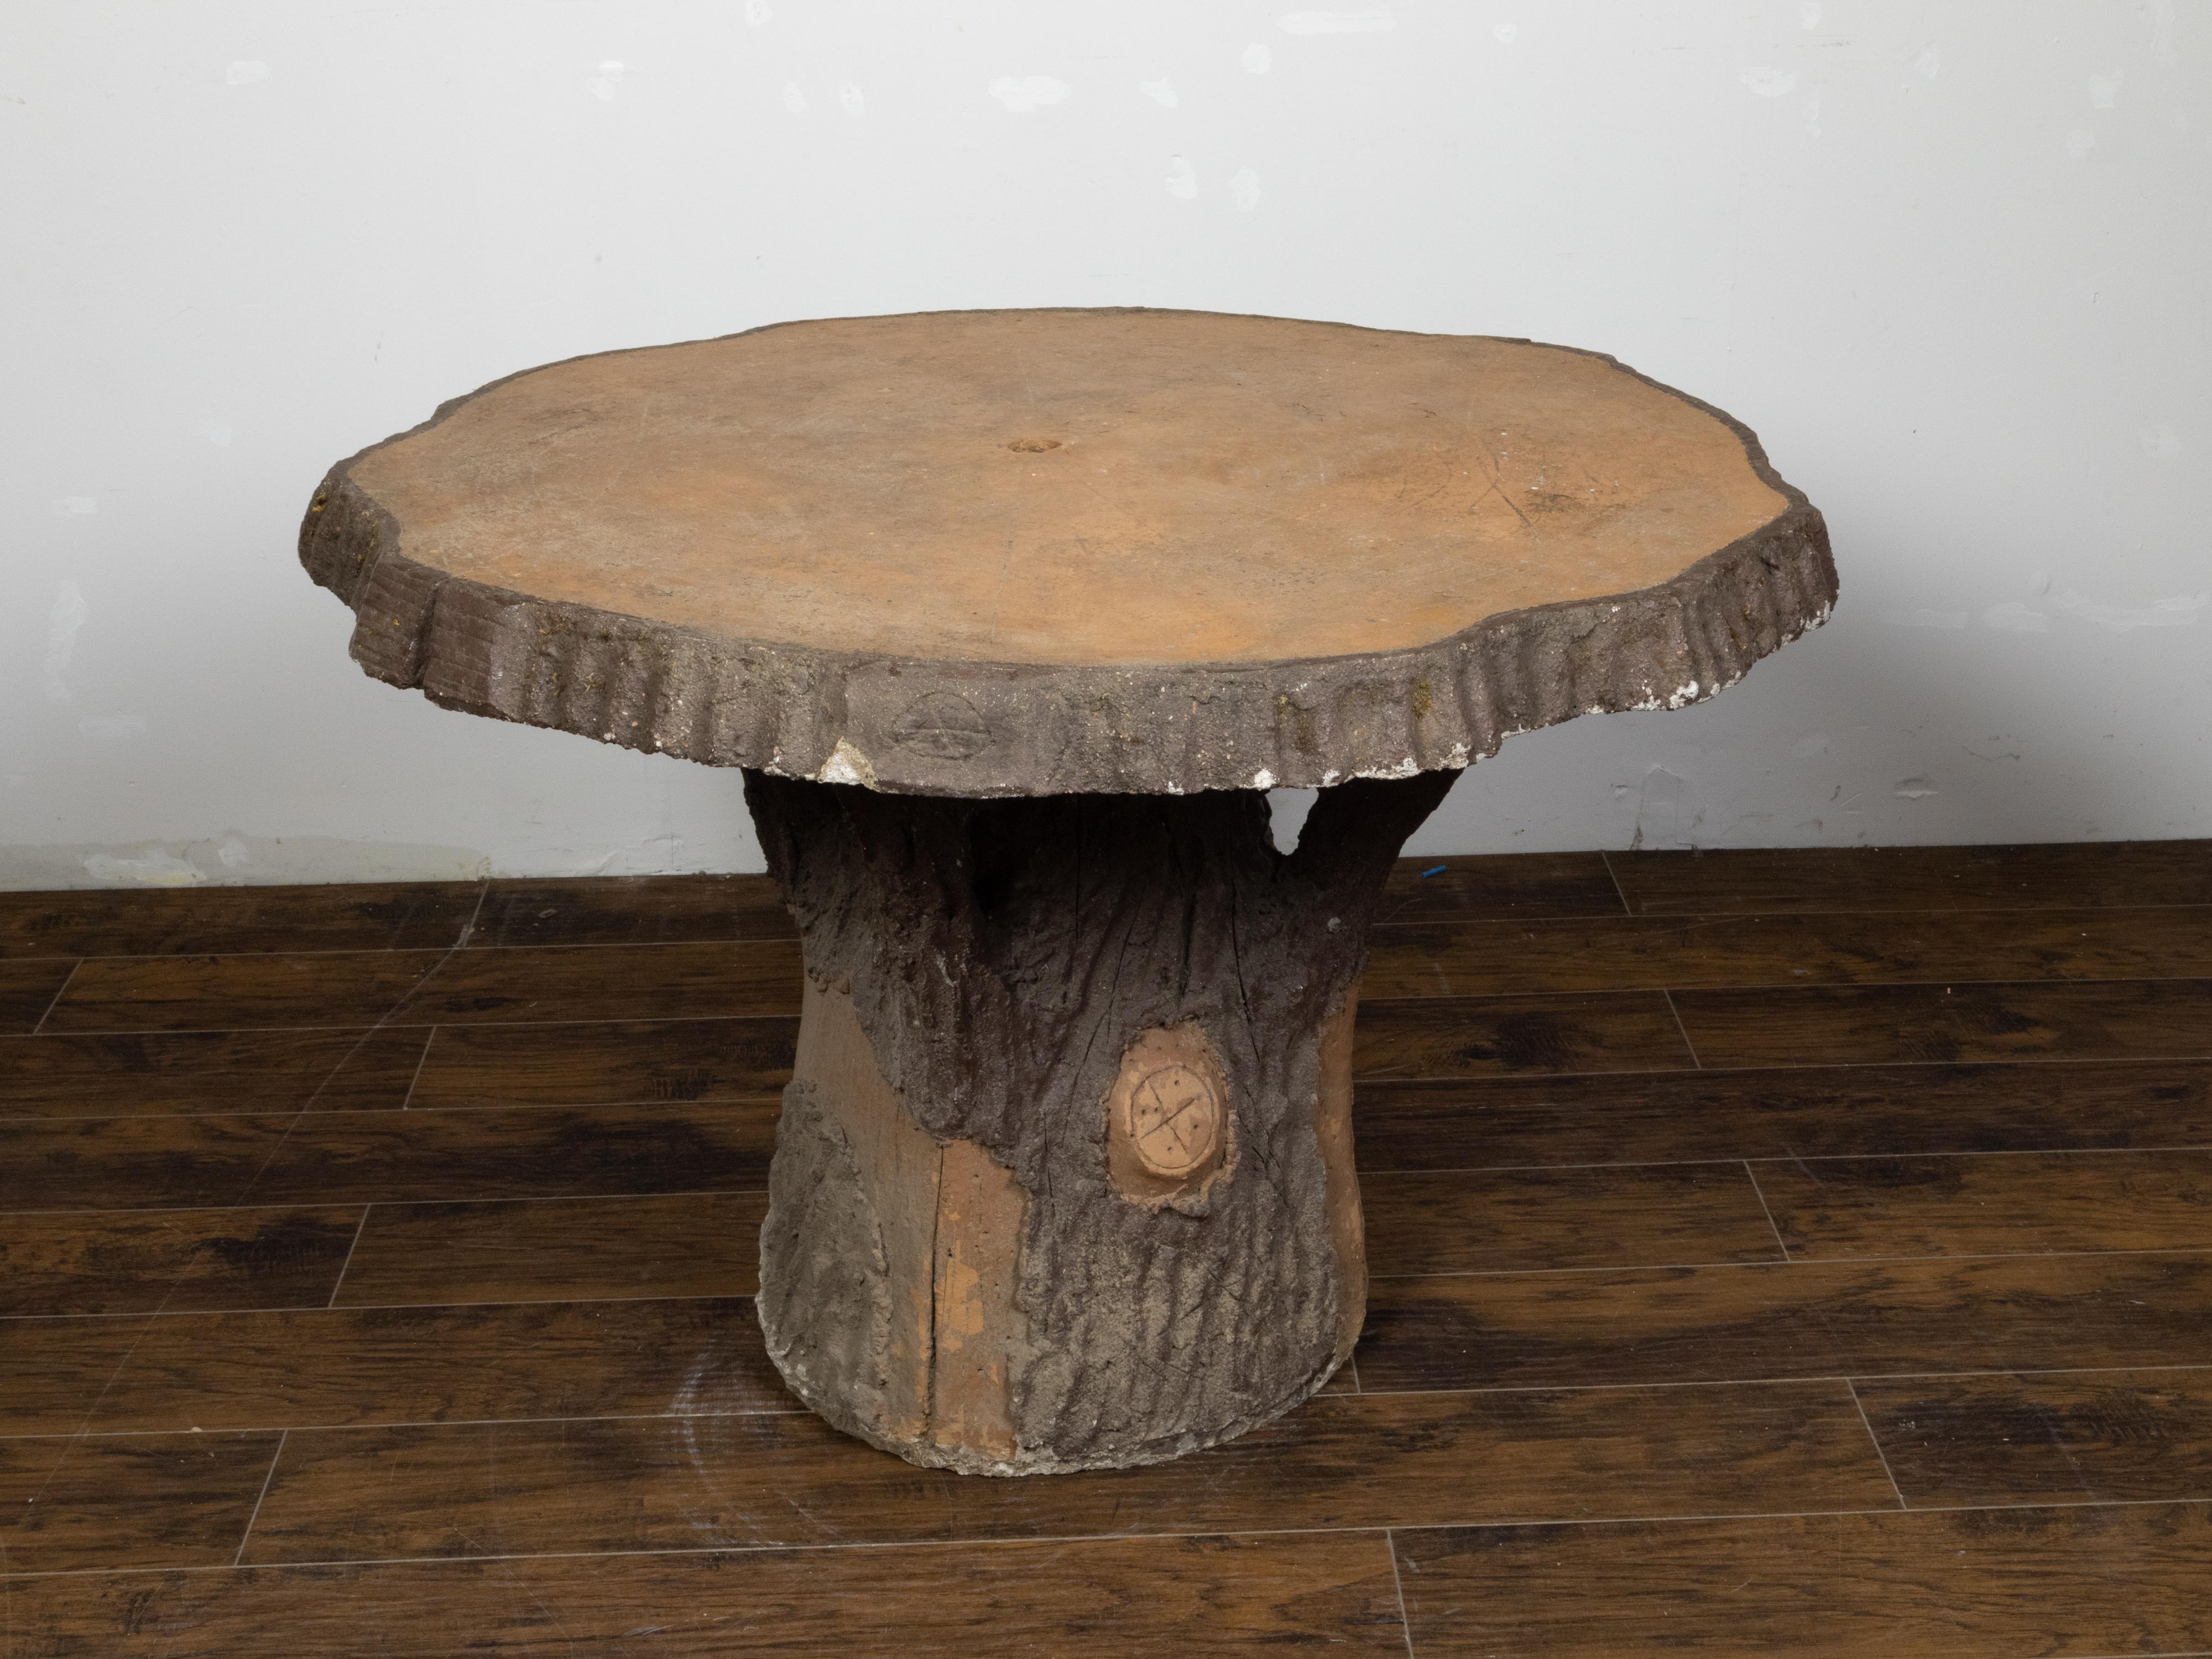 A French faux bois table from the mid 20th century, with round top and rustic appearance. Created in France during the midcentury period, this faux bois table features a circular wood slab top and tree trunk base. Particularly popular in France